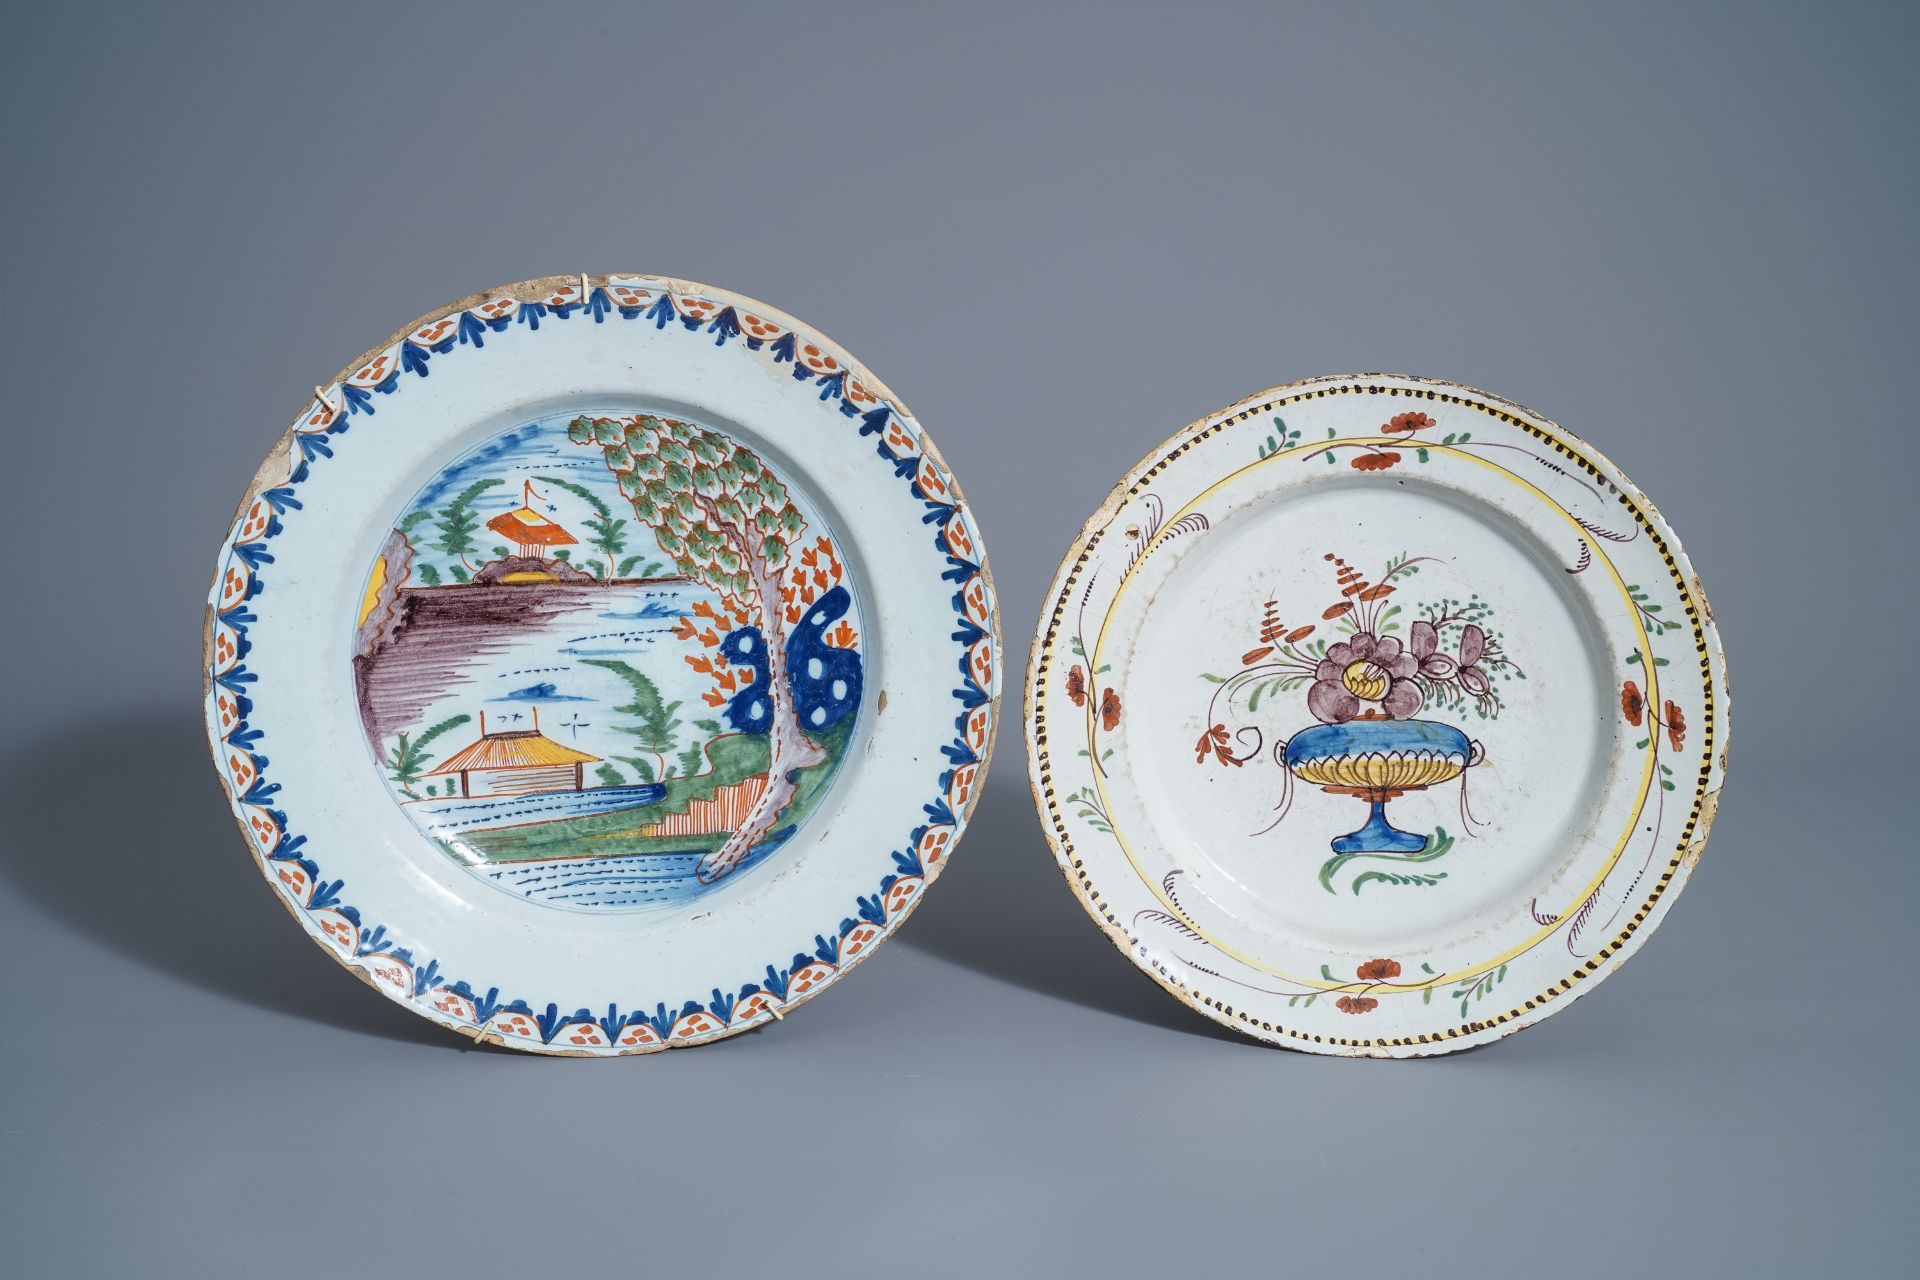 Twelve polychrome and blue and white Dutch Delft plates and an oval tray, 18th C. - Image 8 of 13